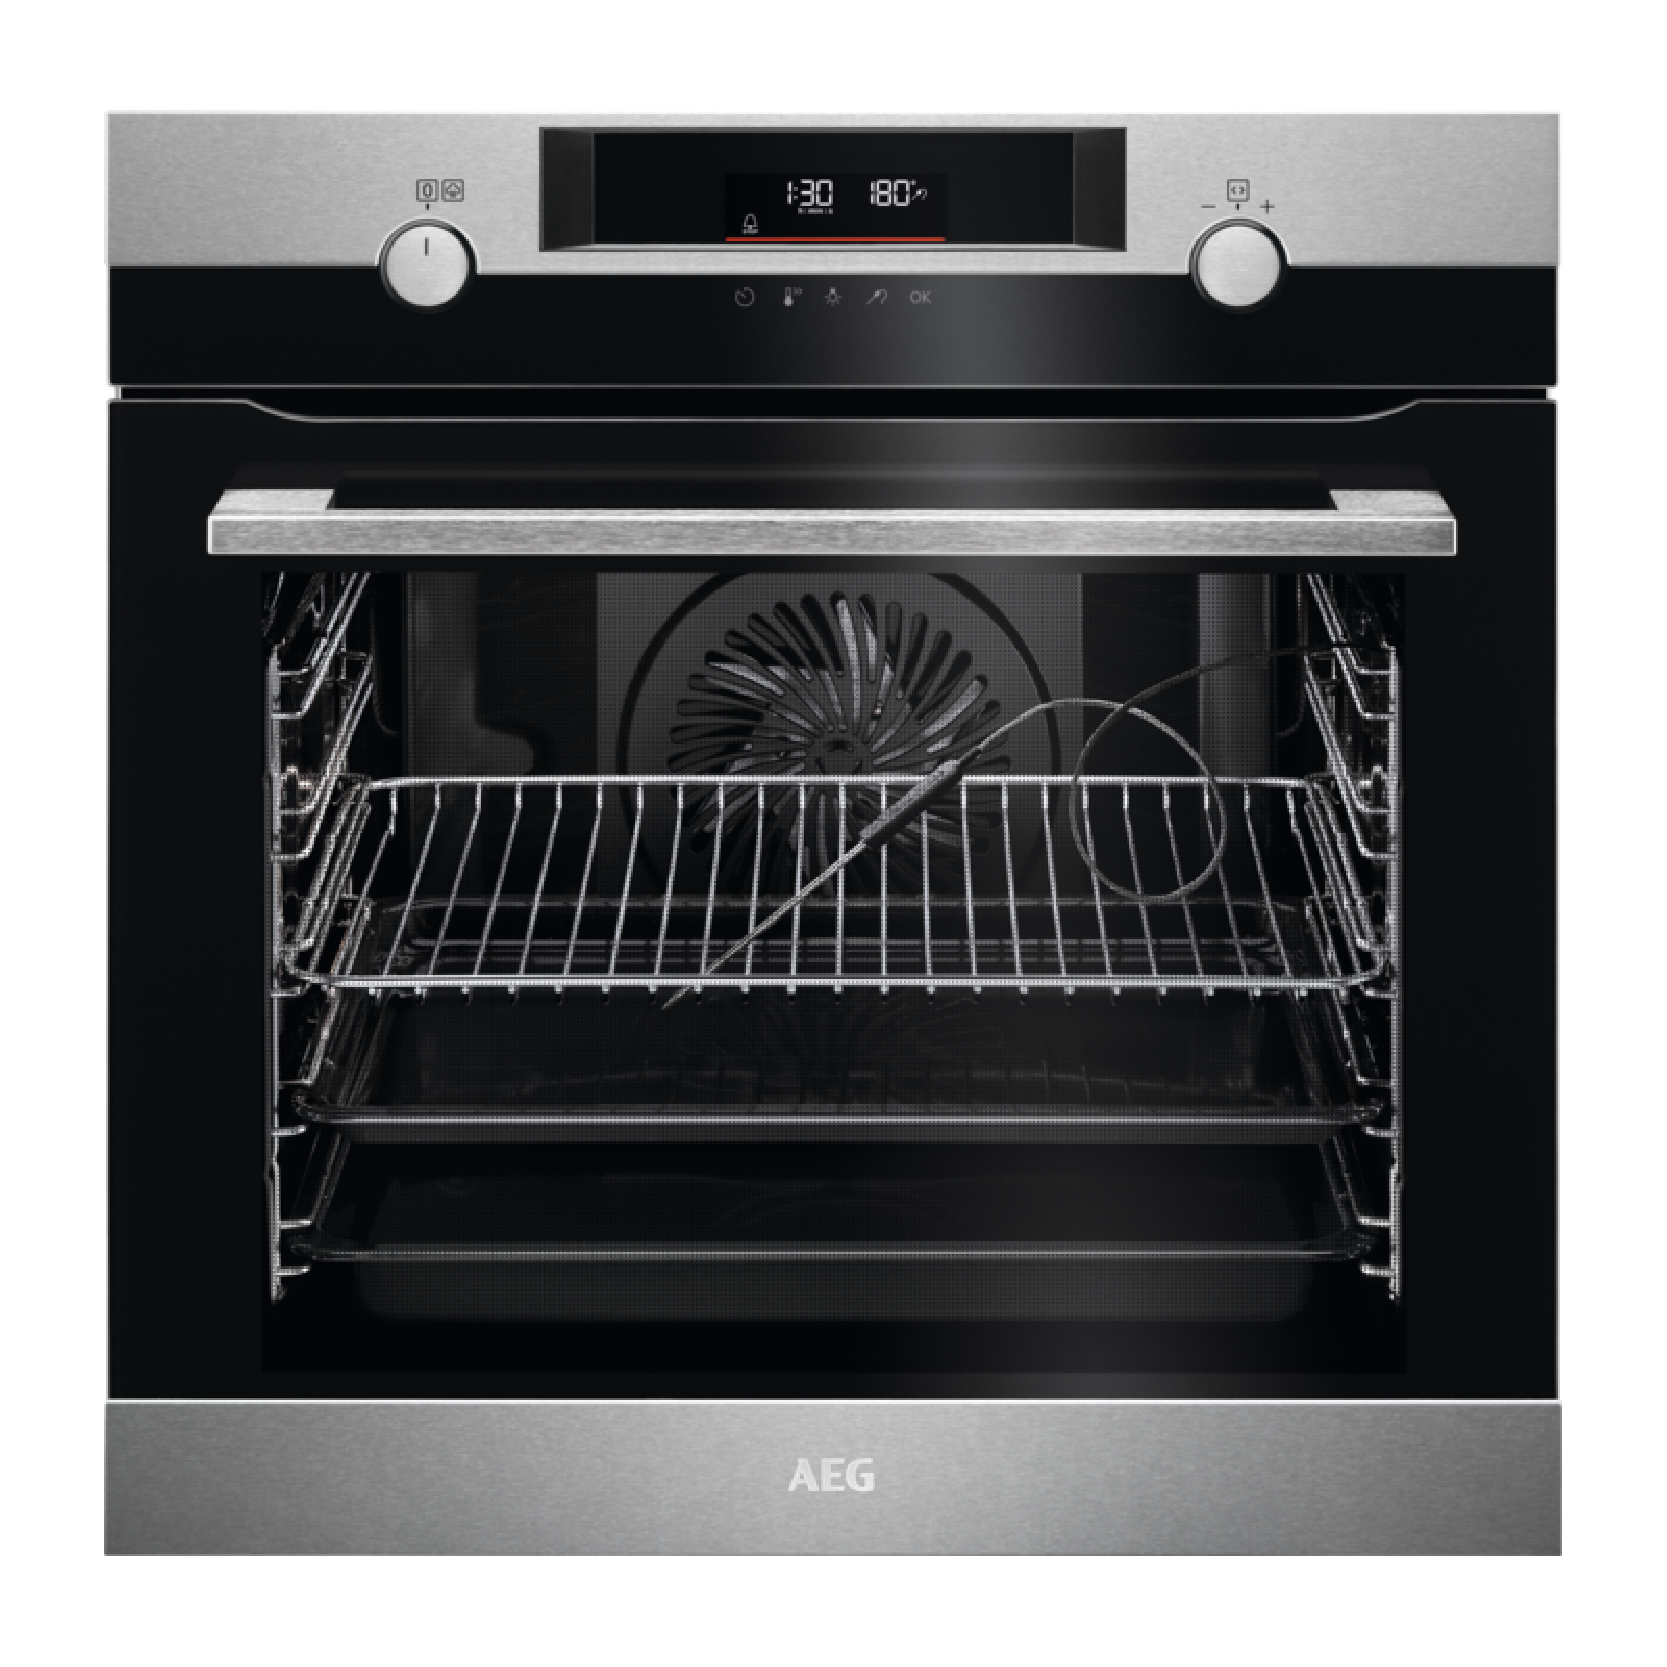 MULTIFUNCTION OVEN SENSECOOK PYROLYTIC SELF-CLEANING AND ROTARY CONTROLS AEG | BPK55636PM